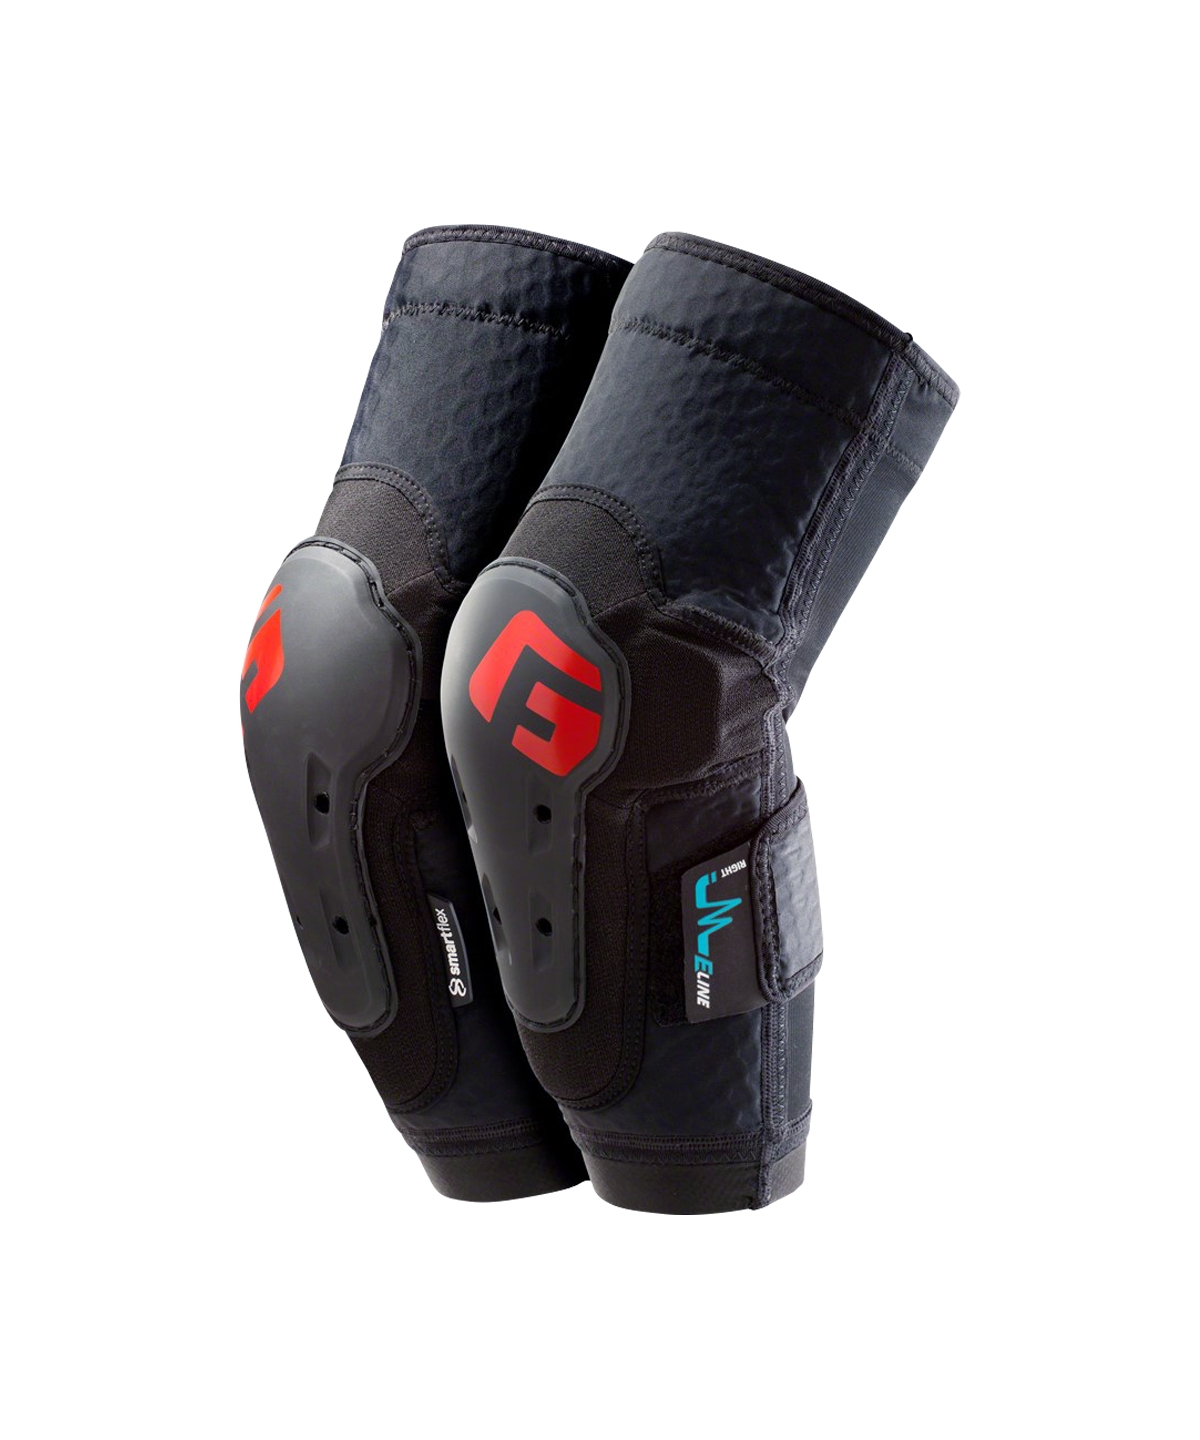 g-form-elite-elbow-guards-body-map-race-day-ski-boots